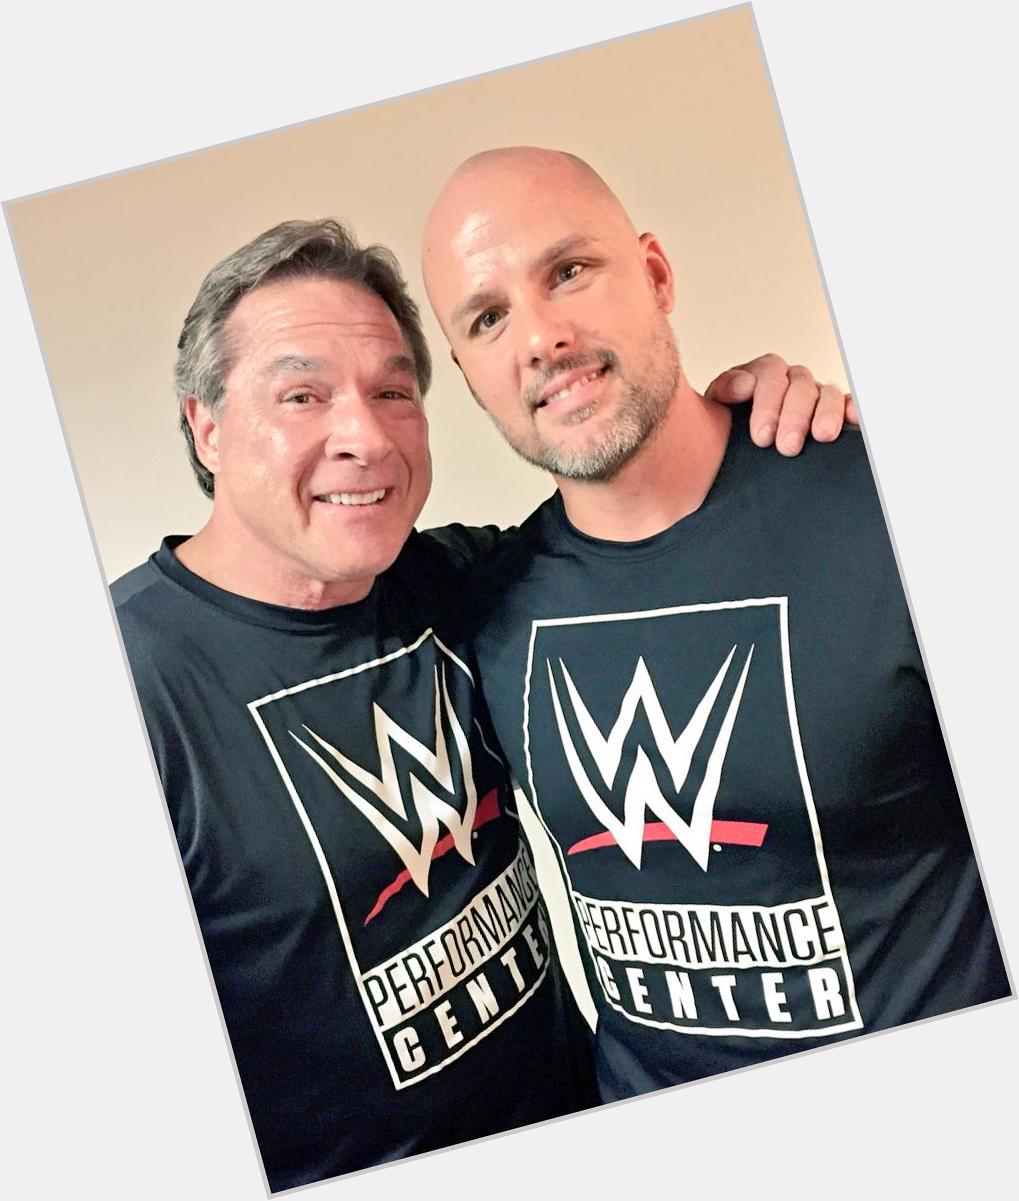 Happy birthday to my friend and mentor, Terry Taylor! Forever grateful for what you\ve done for me over the years. 